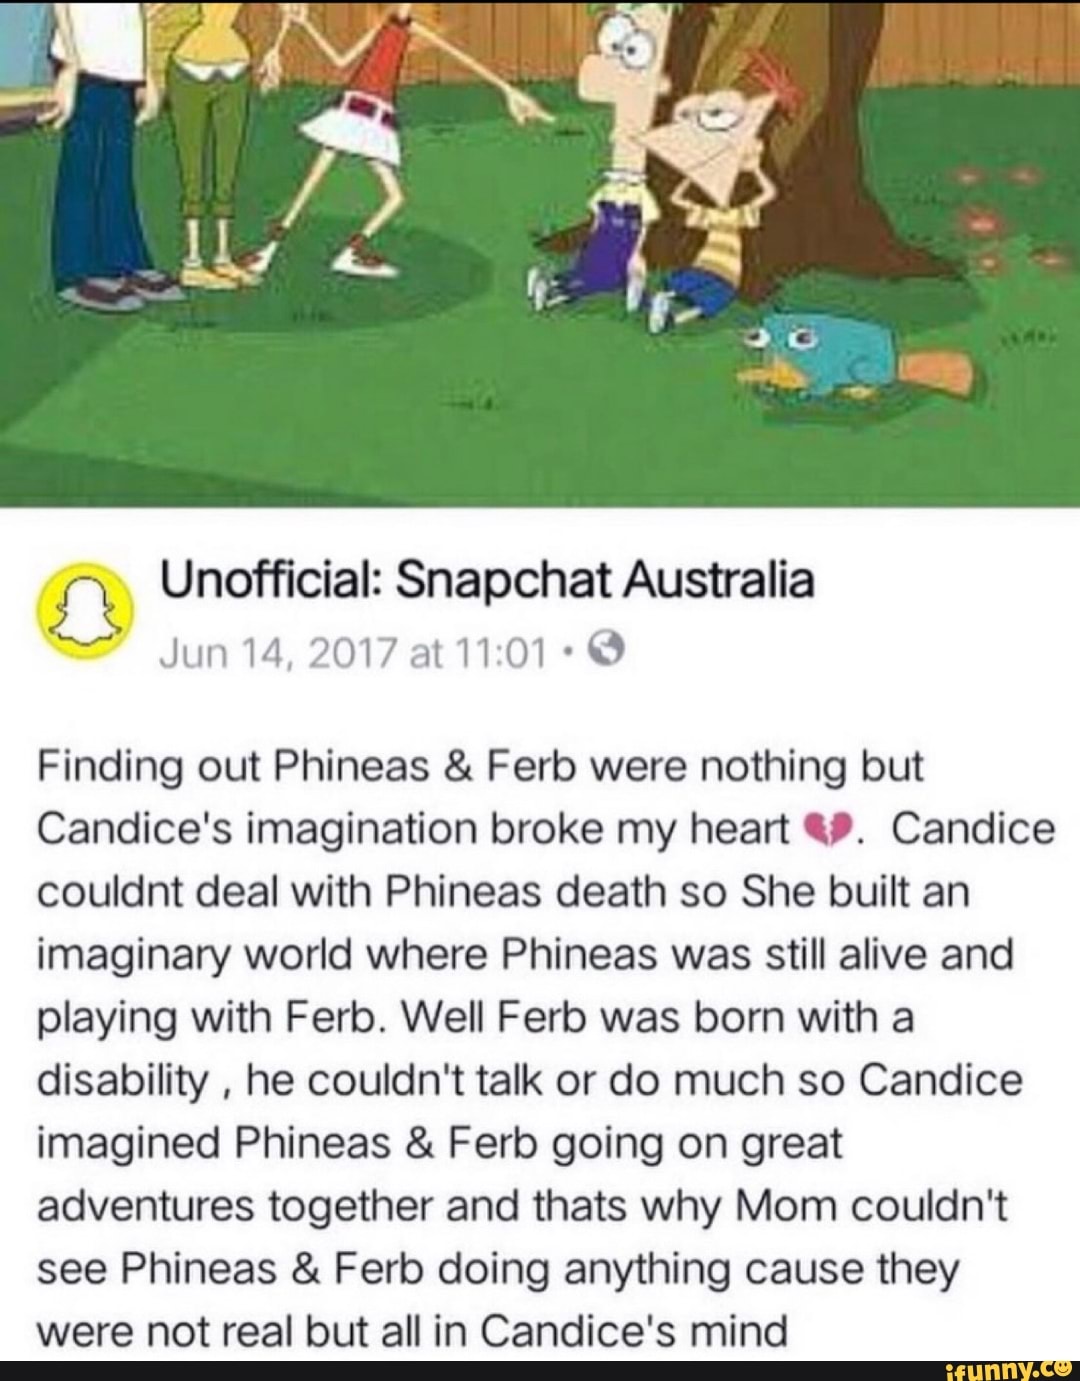 Unofﬁcial Snapchat Australia Jlih1 1h7017leio1 Finding Out Phineas Ferb Were Nothing But Candice S Imagination Broke My Heart Candice Couldnt Deal With Phineas Death So She Built An Imaginary World Where Phineas